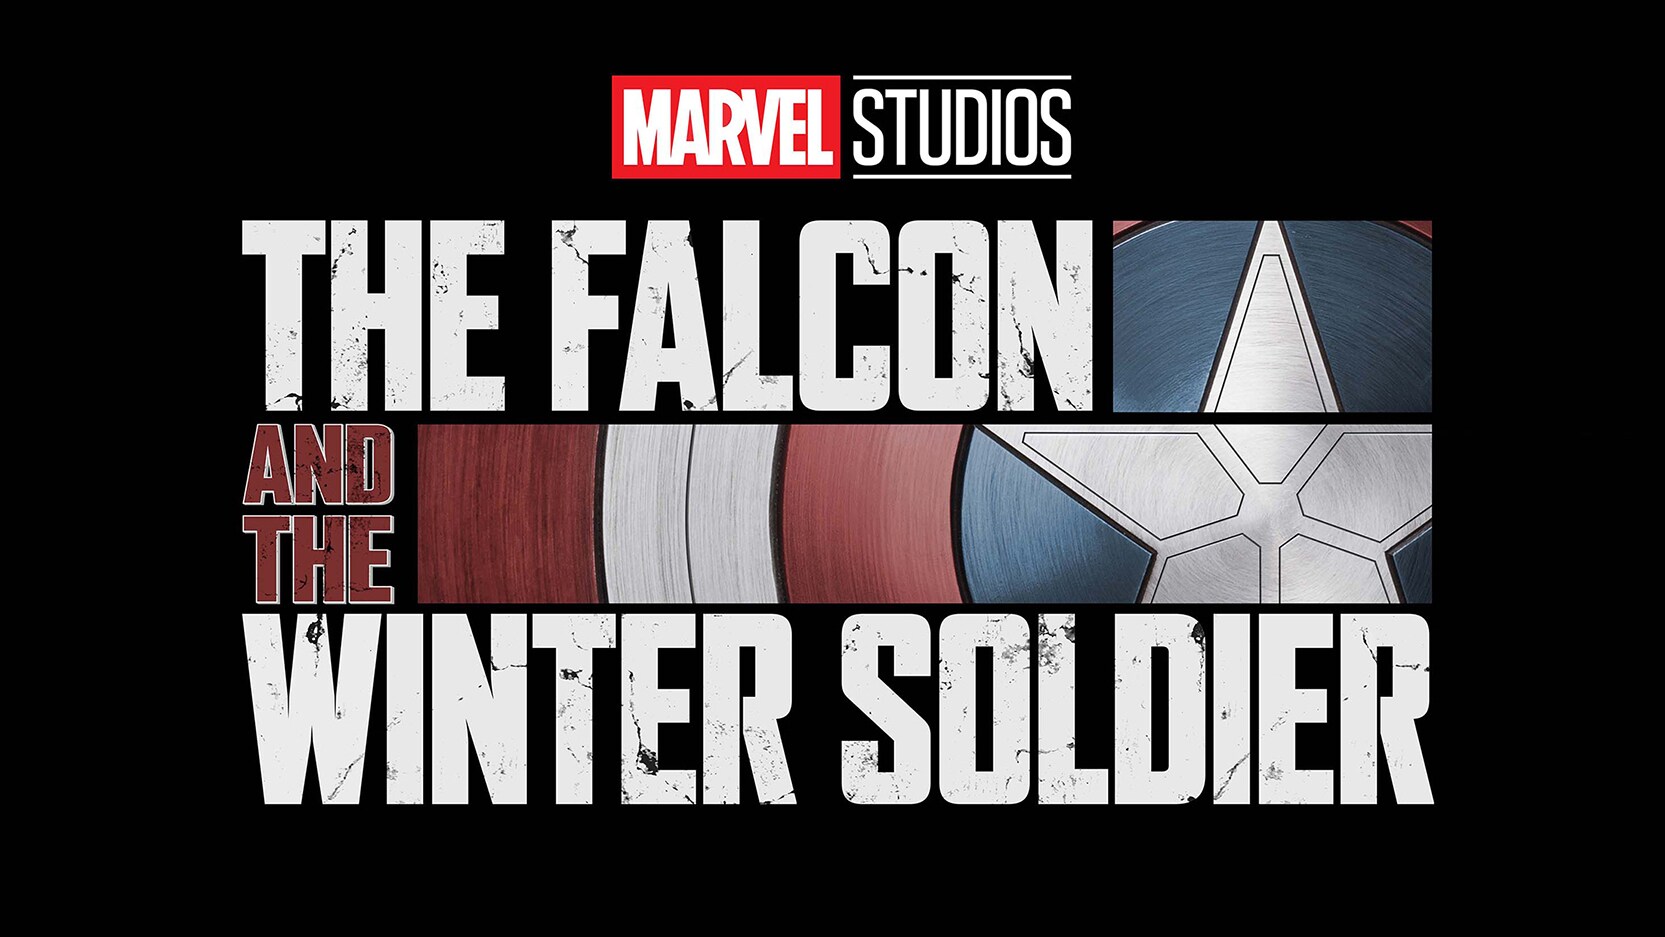 Marvel Studios’ “The Falcon and The Winter Soldier” Mid-Season Sneak Peek Available Now